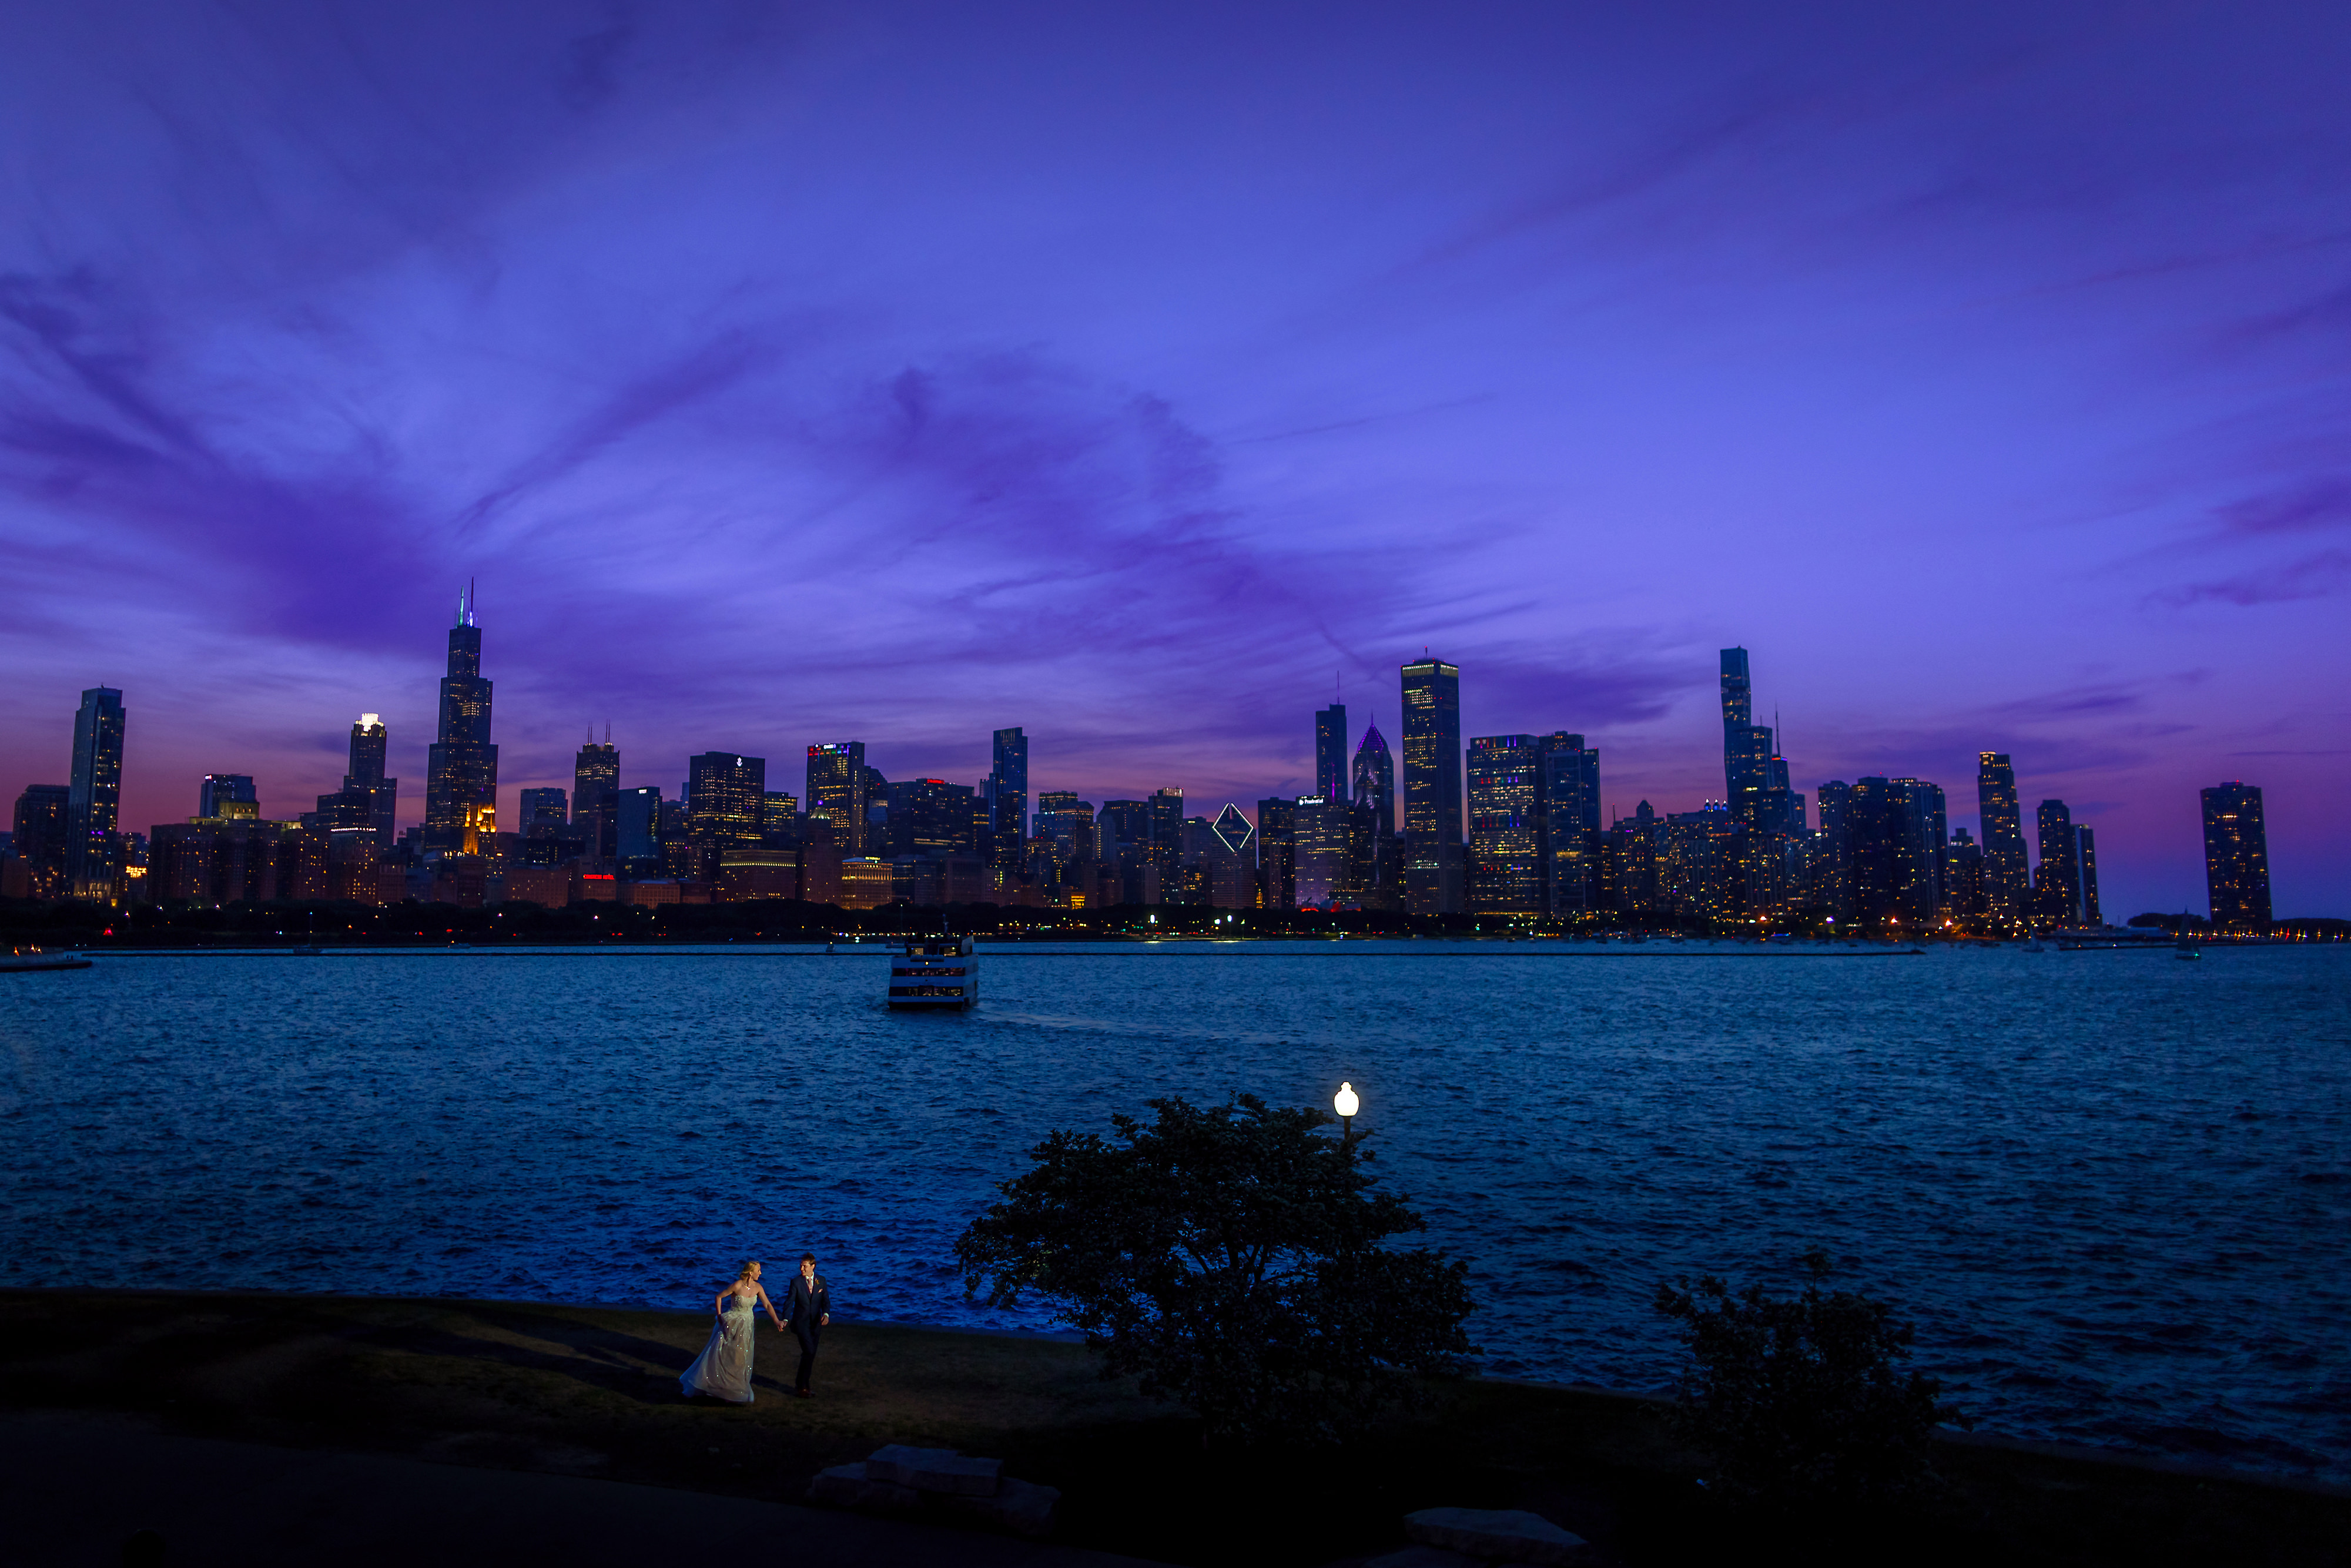 Bride and groom dusk blue hour portrait with Chicago city skyline in the background